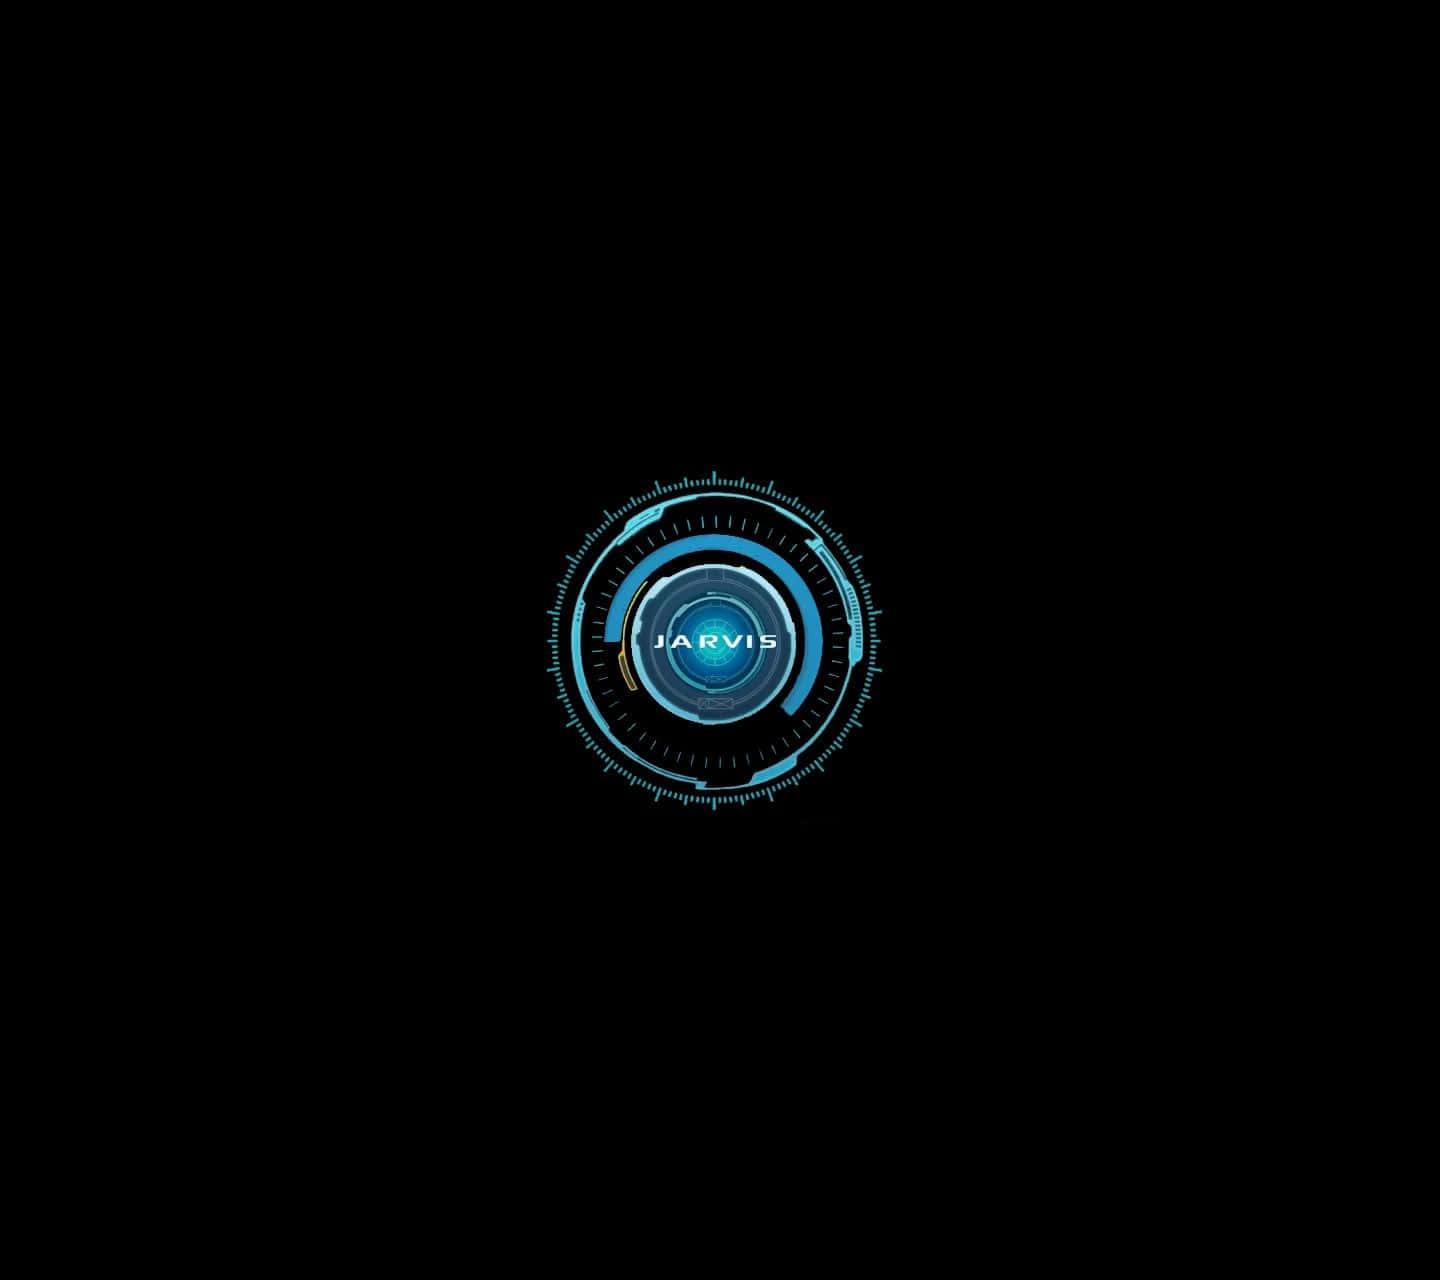 Jarvis, the powerful AI assistant Wallpaper